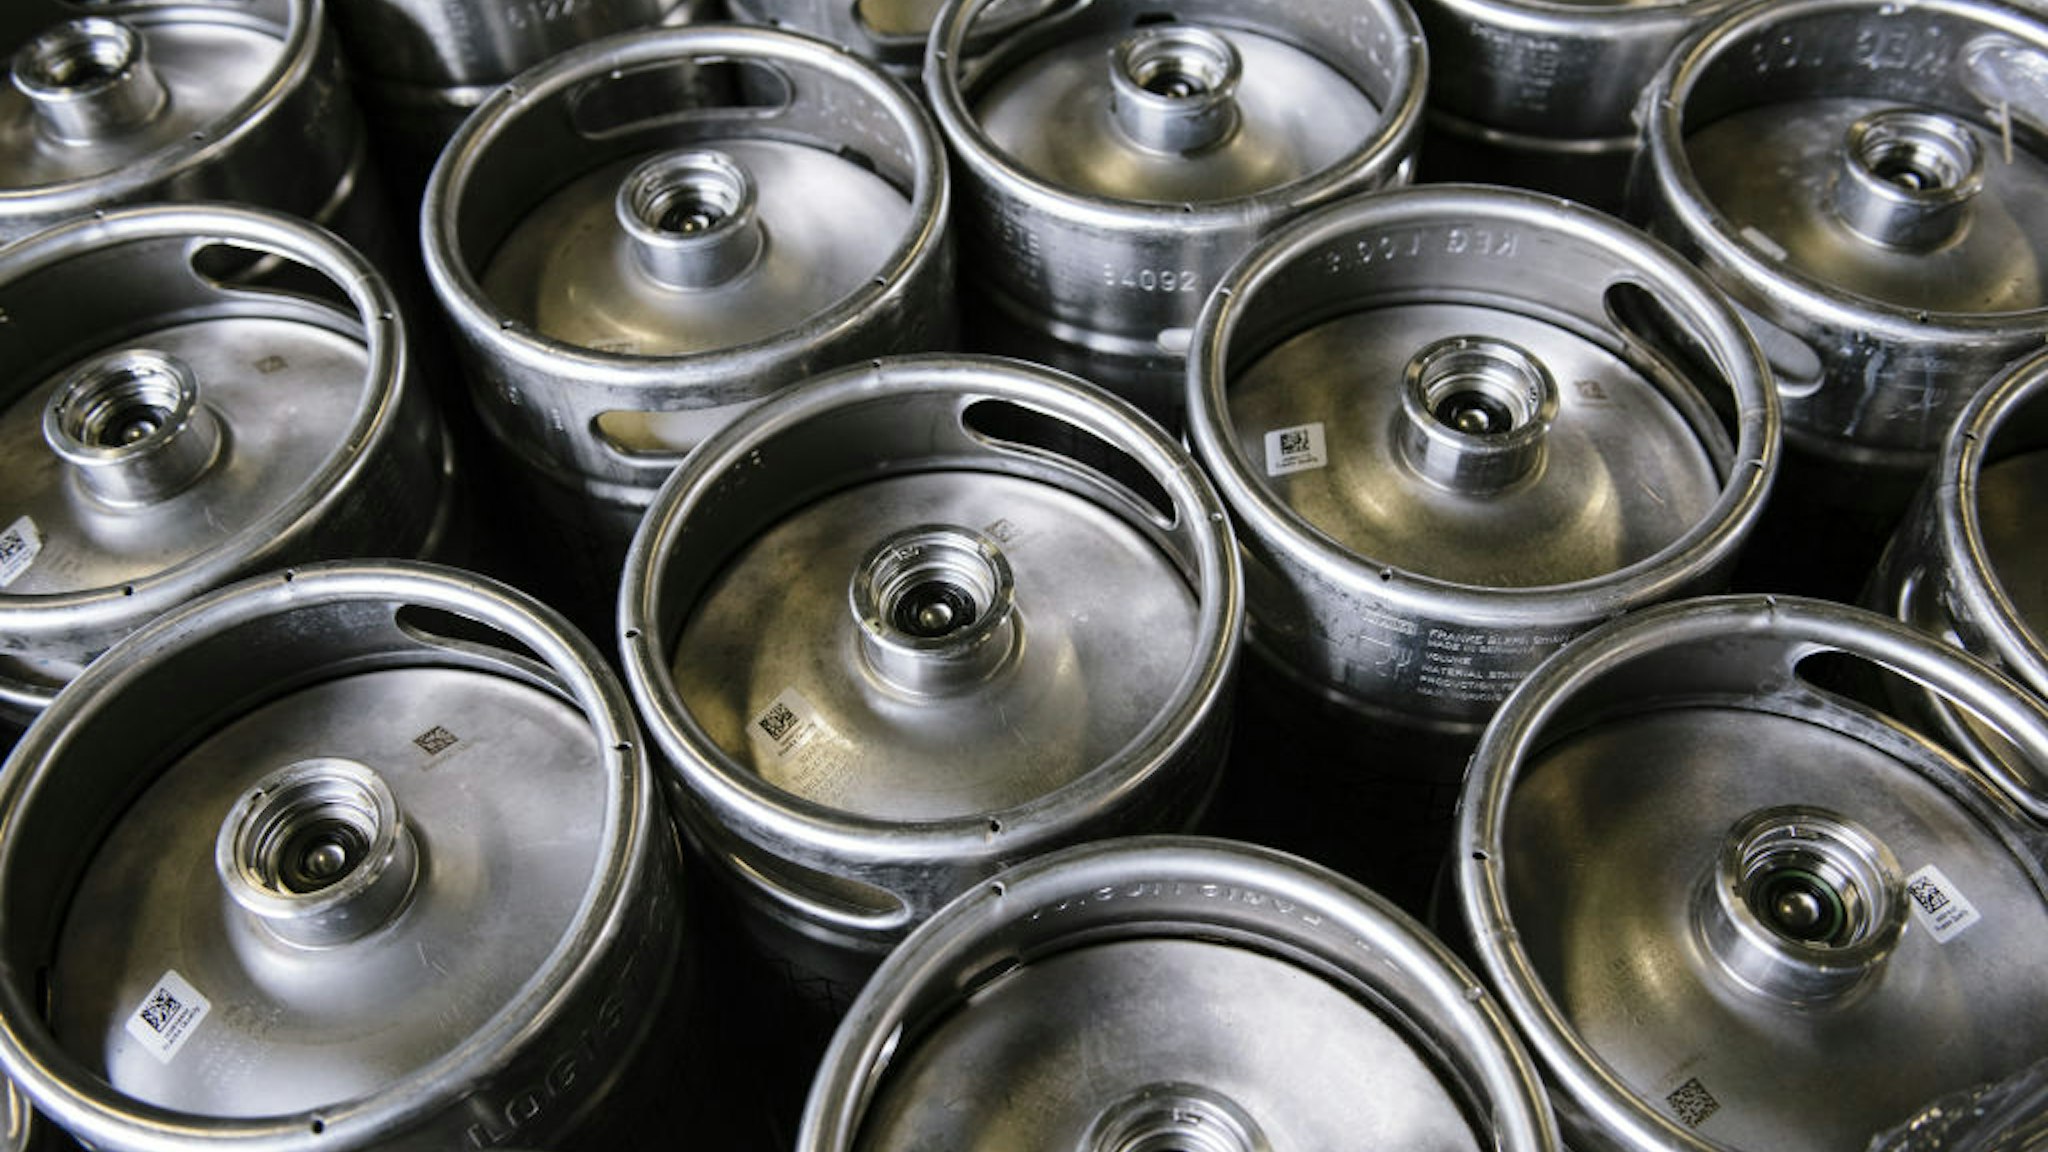 Sixtel kegs of beer that couldn't be sold to restaurants and bars due to closures related to the coronavirus pandemic sit in rows at the Fort Point Beer Co. brewery in San Francisco, California, U.S., on Friday, April 17, 2020.